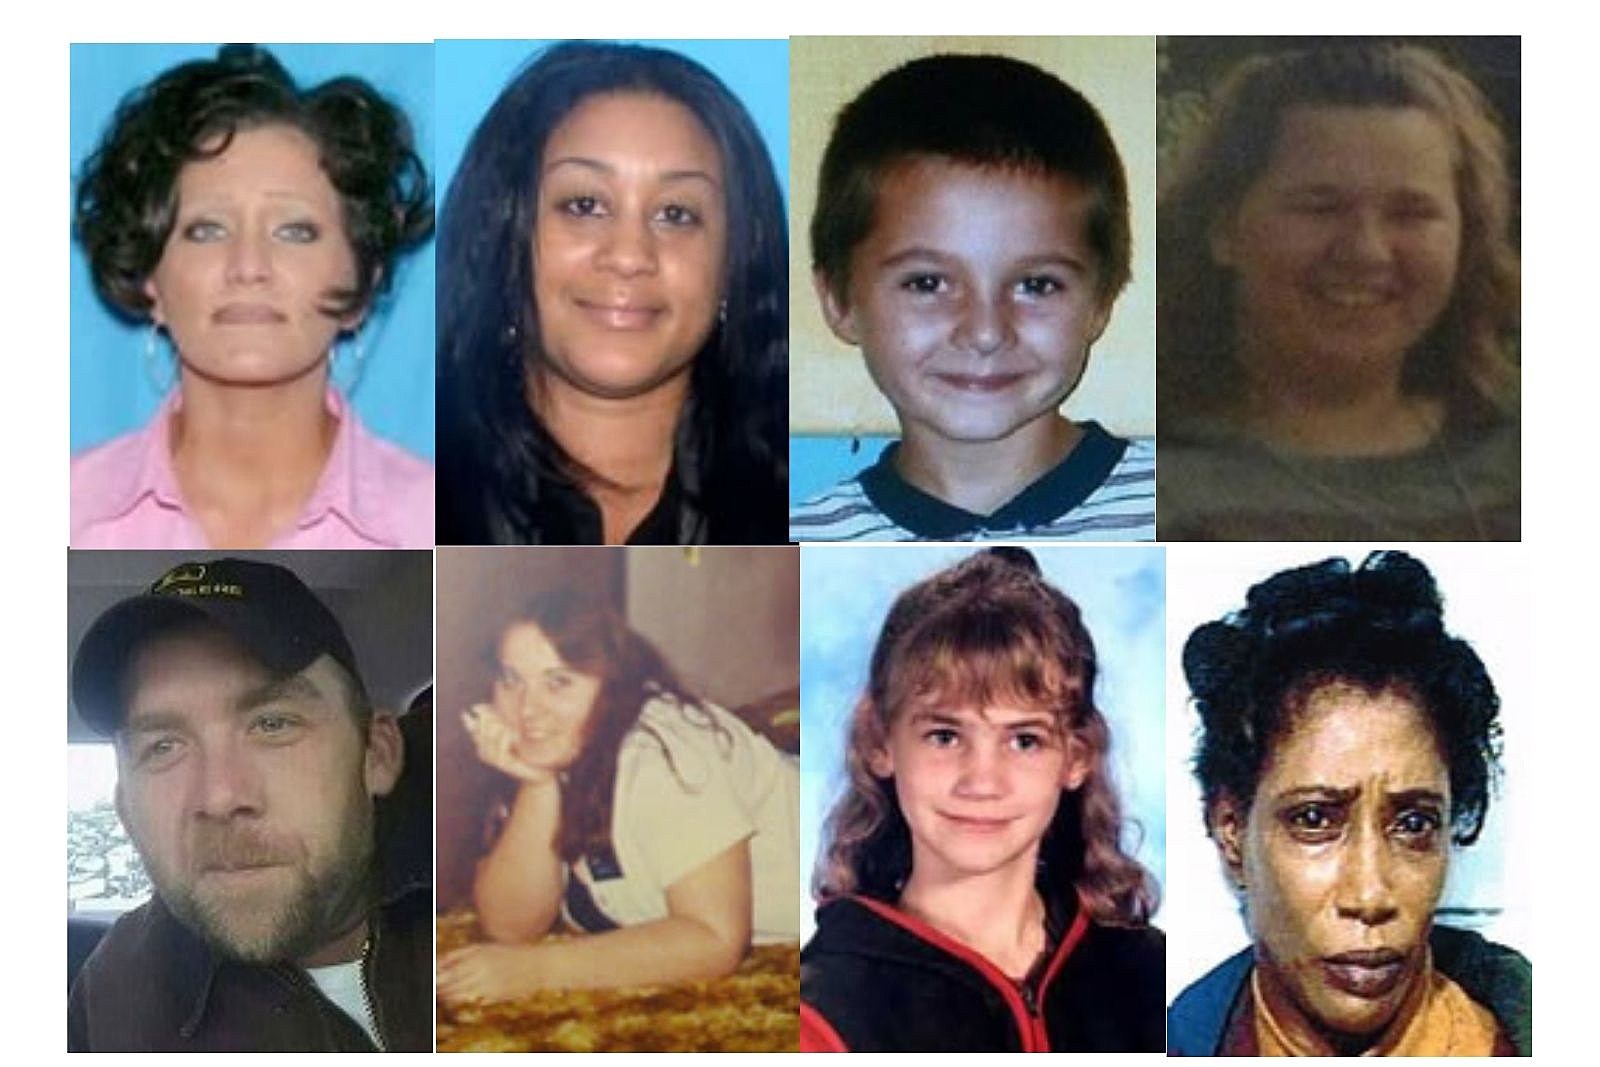 Alabama's Most Haunting Unsolved Murder Cases